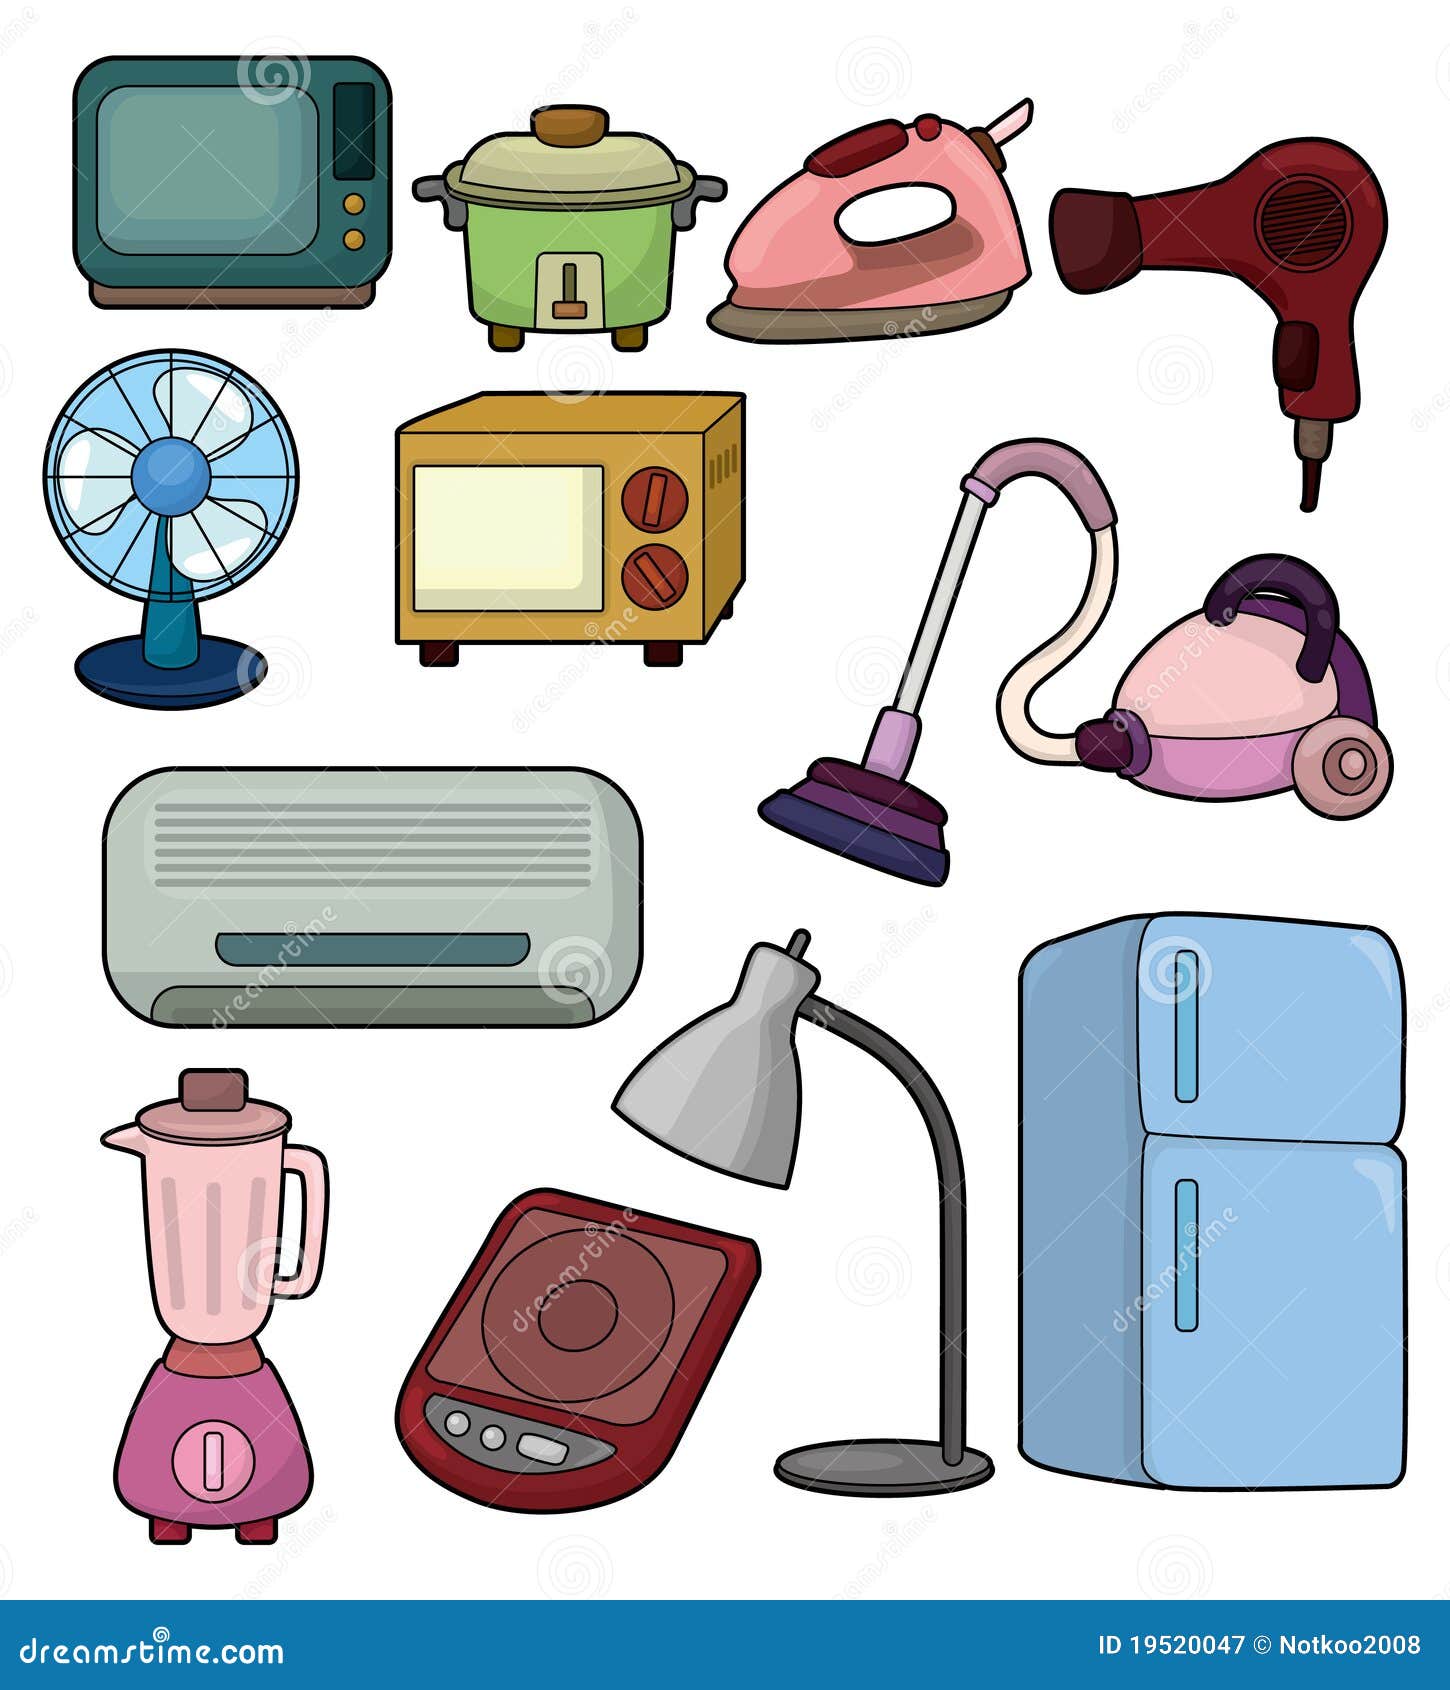 Cartoon Home Appliance Icon Royalty Free Stock Photography   Image  